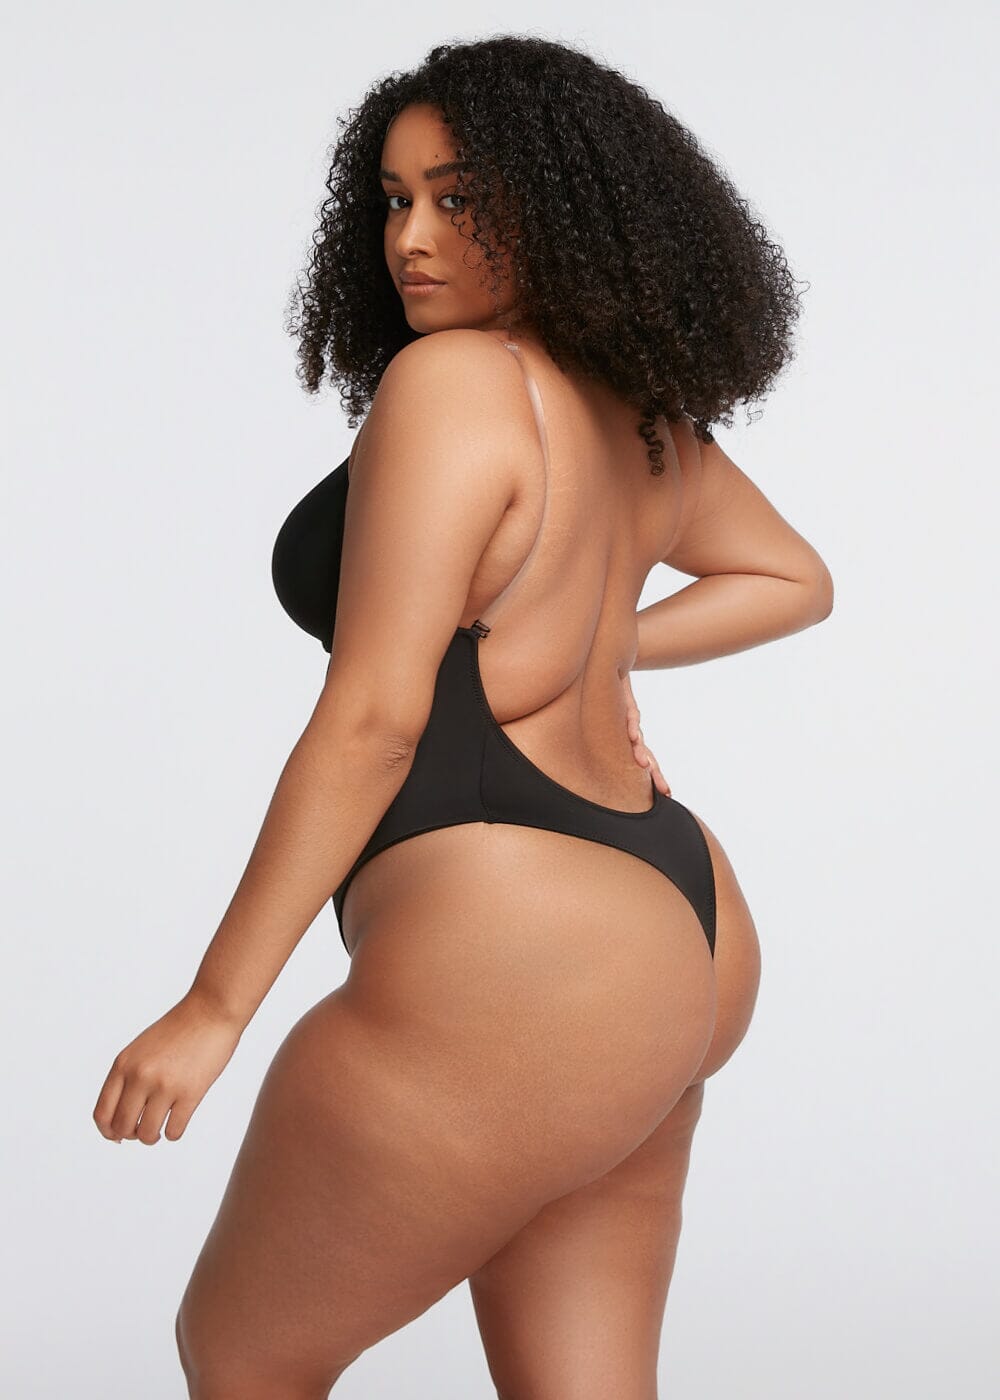 SheCurve® Invisible Backless Bodysuit - Buy 1 Get 1 Free (2 Pack)